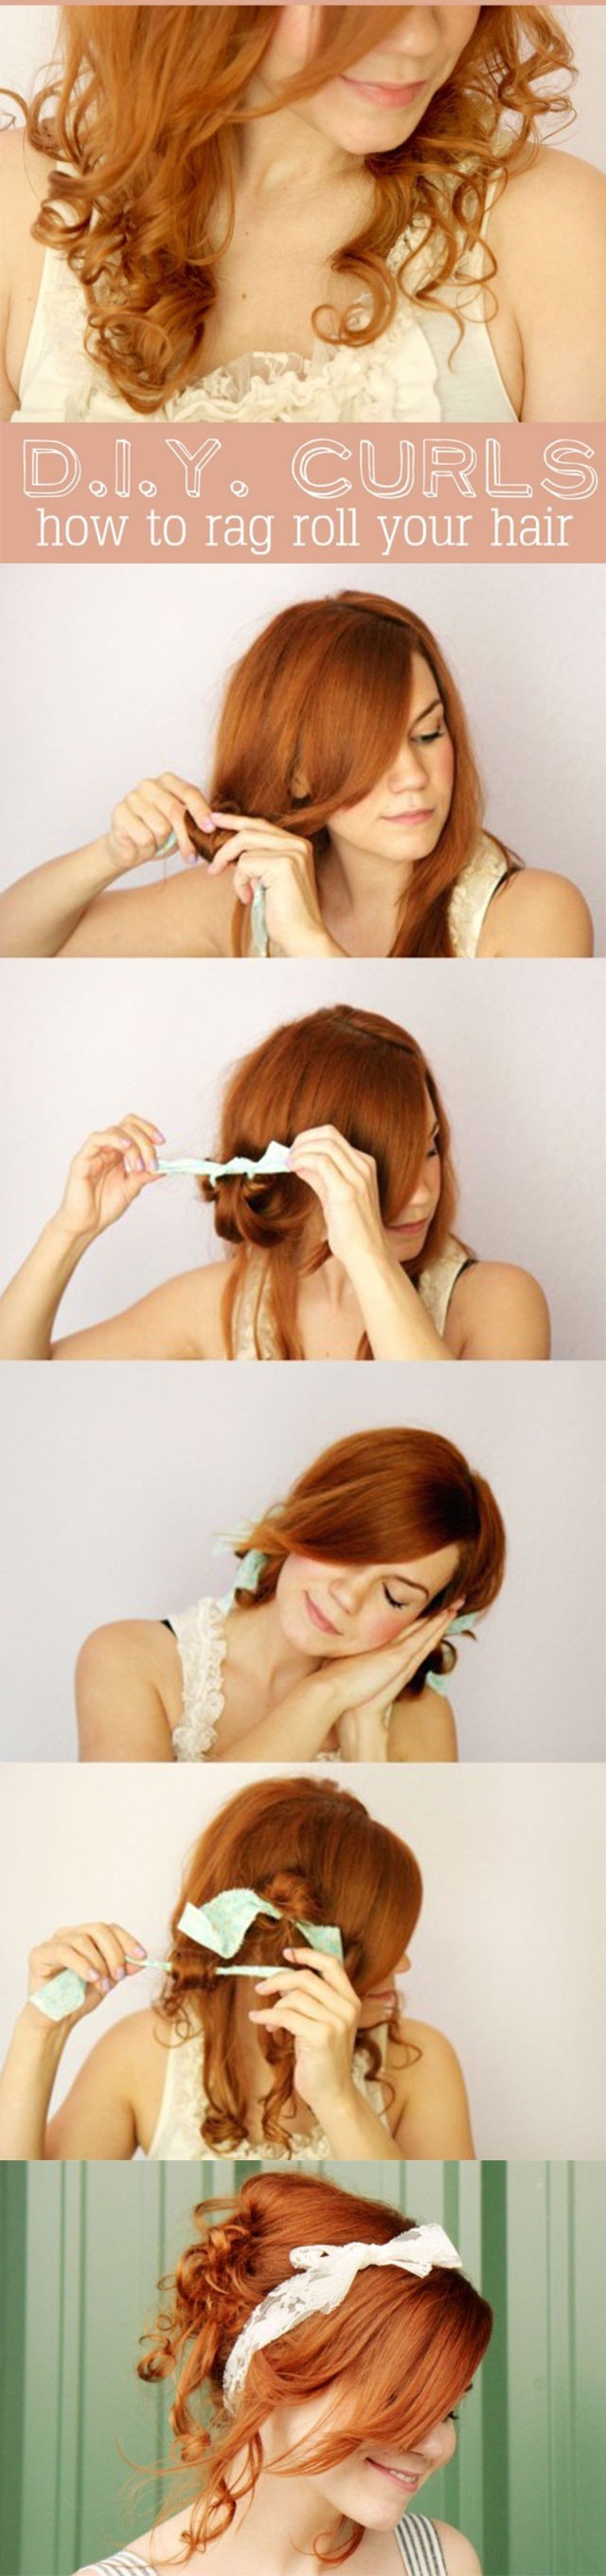 DIY curls: how to rag your hair